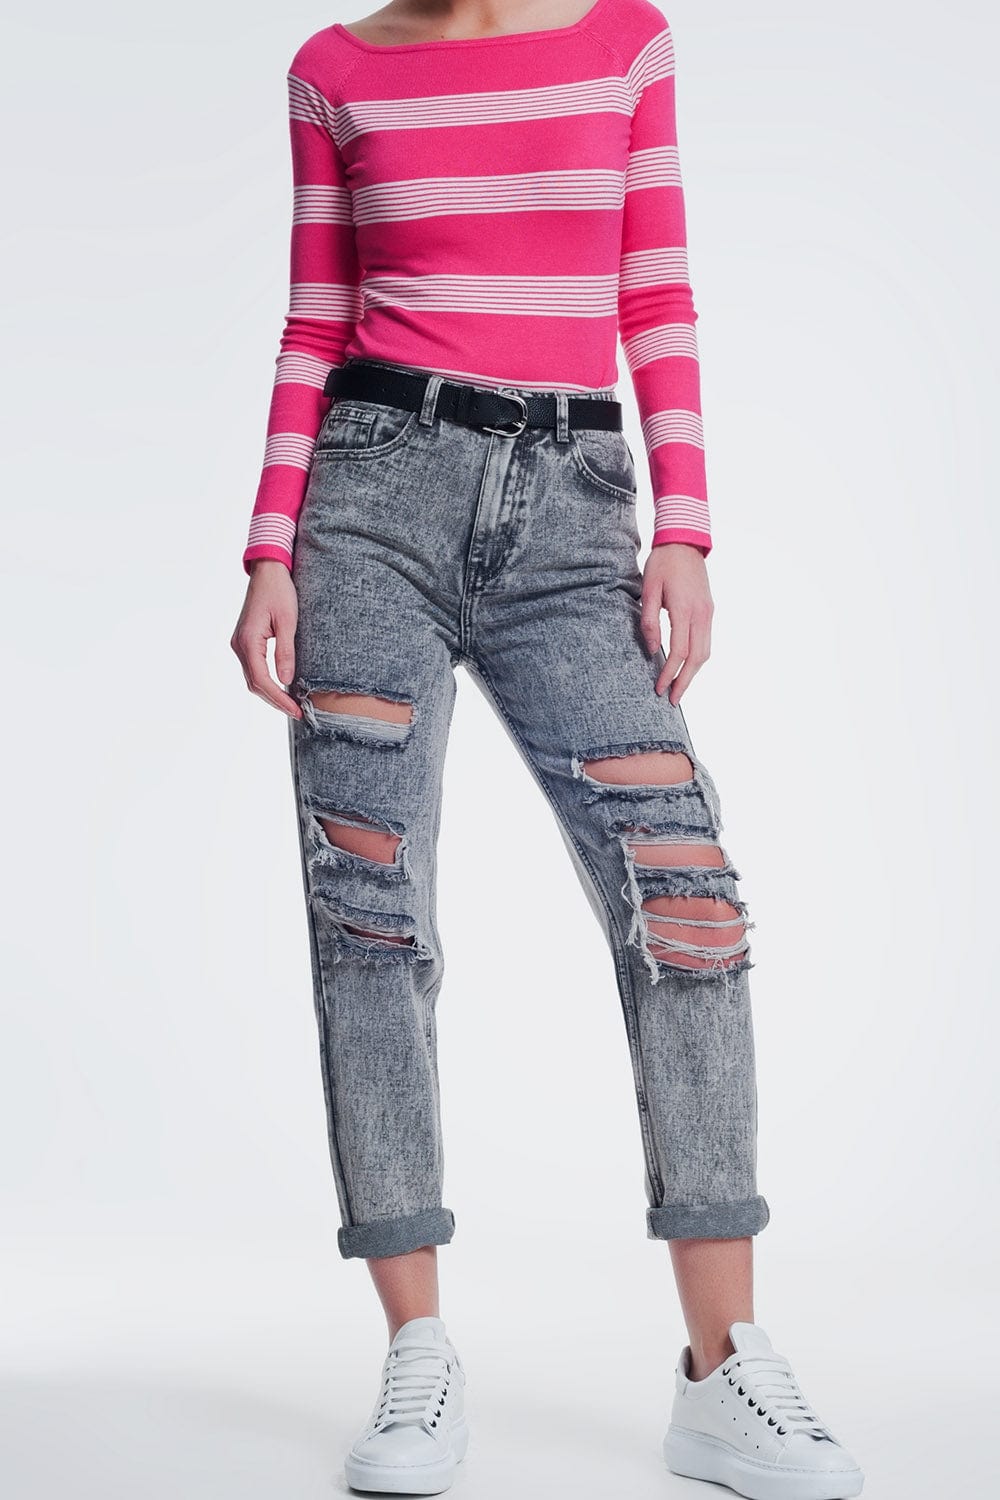 Q2 Women's Jean Ripped Straight Jeans in Gray